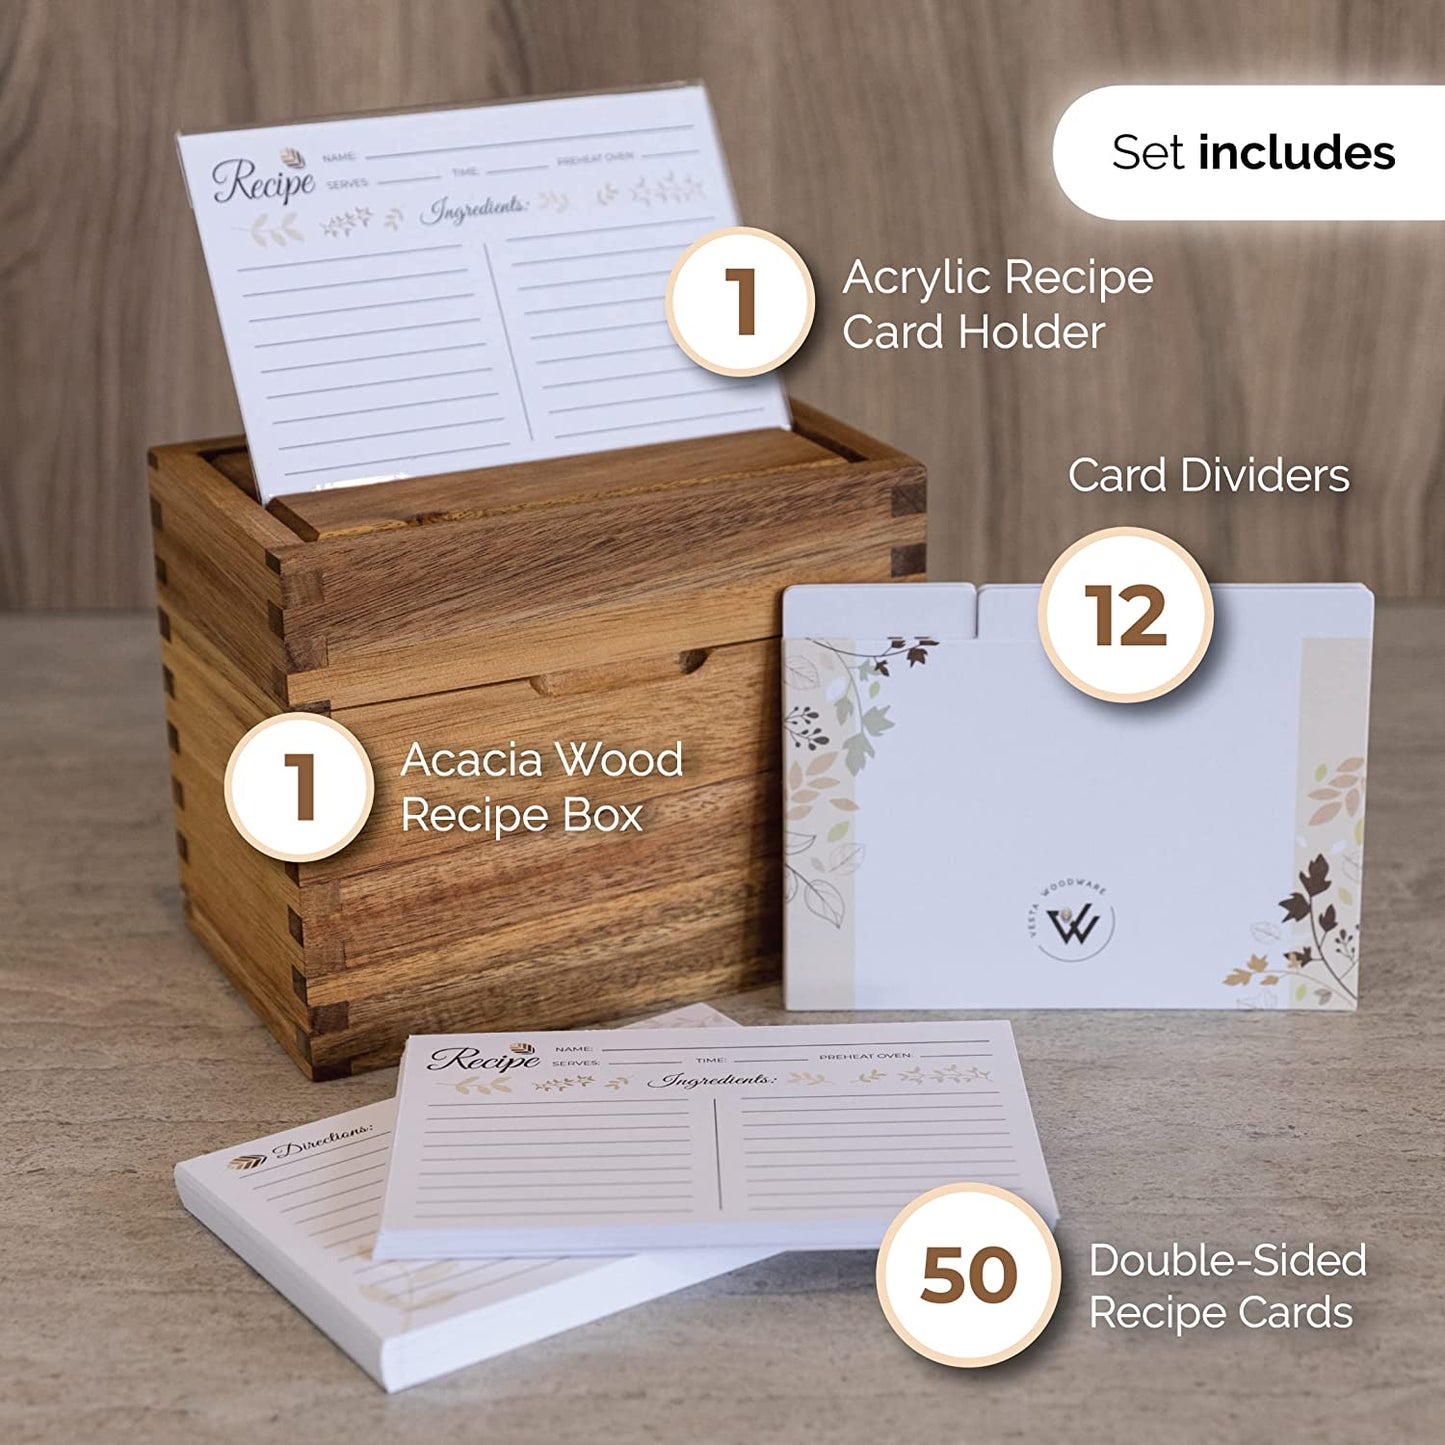 Recipe Box with Cards and Dividers 4x6 - Wooden Recipe card box set includes an acrylic recipe card holder, 50 premium blank recipe cards and 12 dividers - Smooth mineral oil and beeswax finish